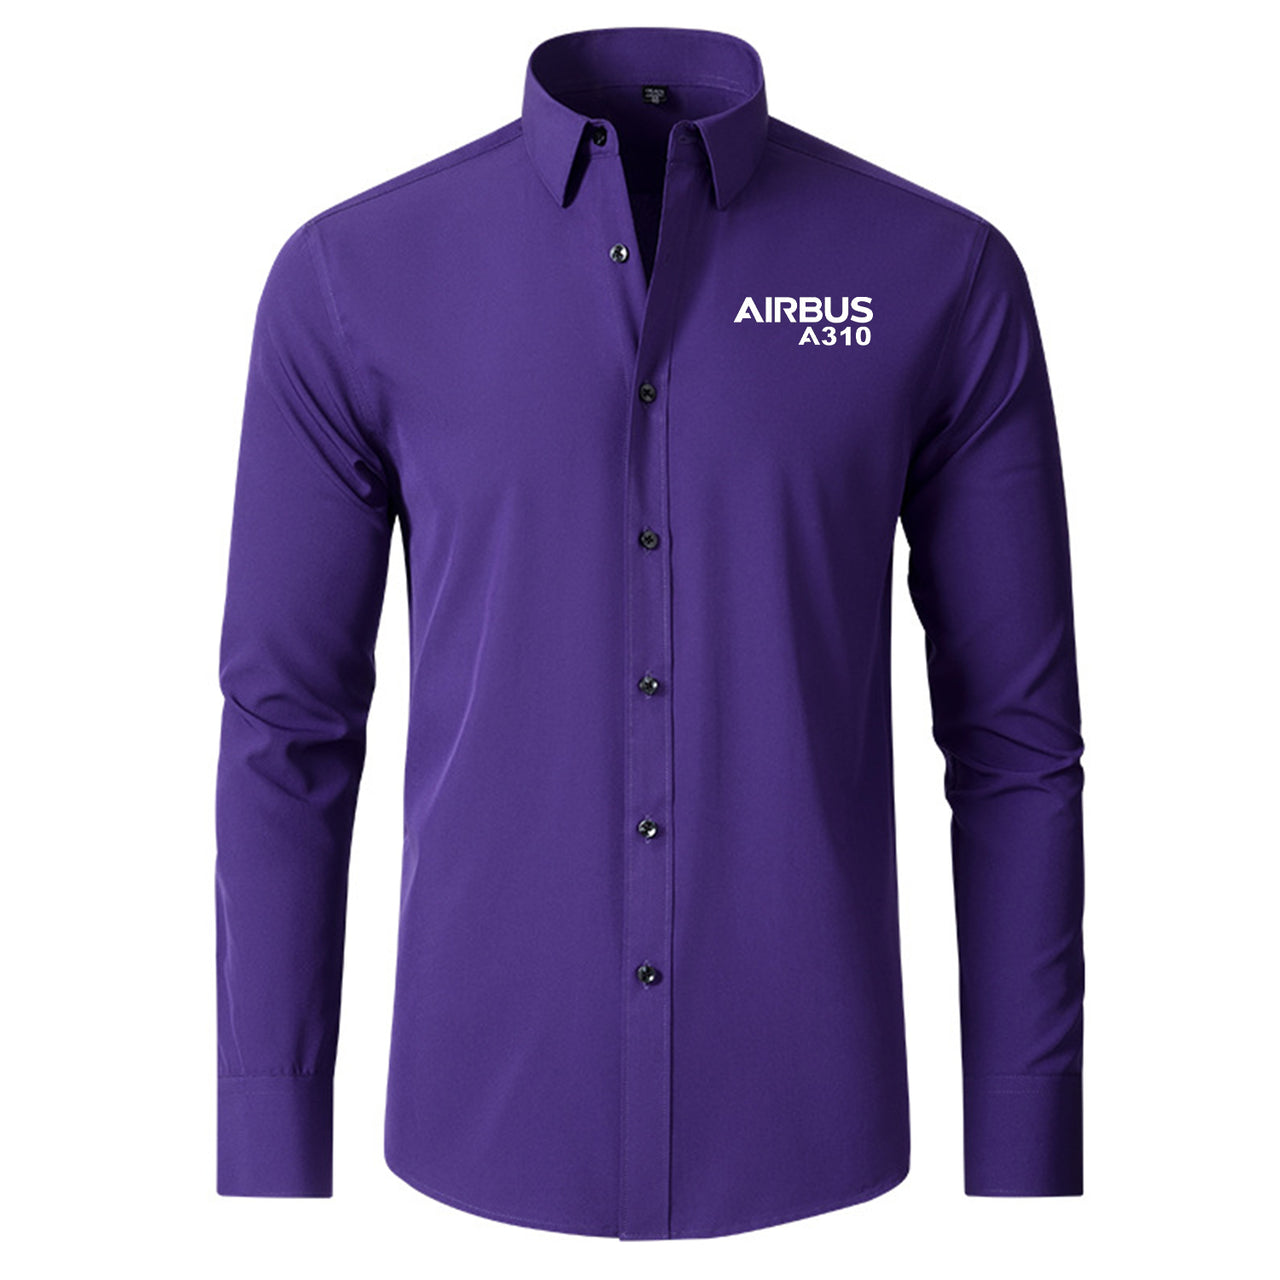 Airbus A310 & Text Designed Long Sleeve Shirts